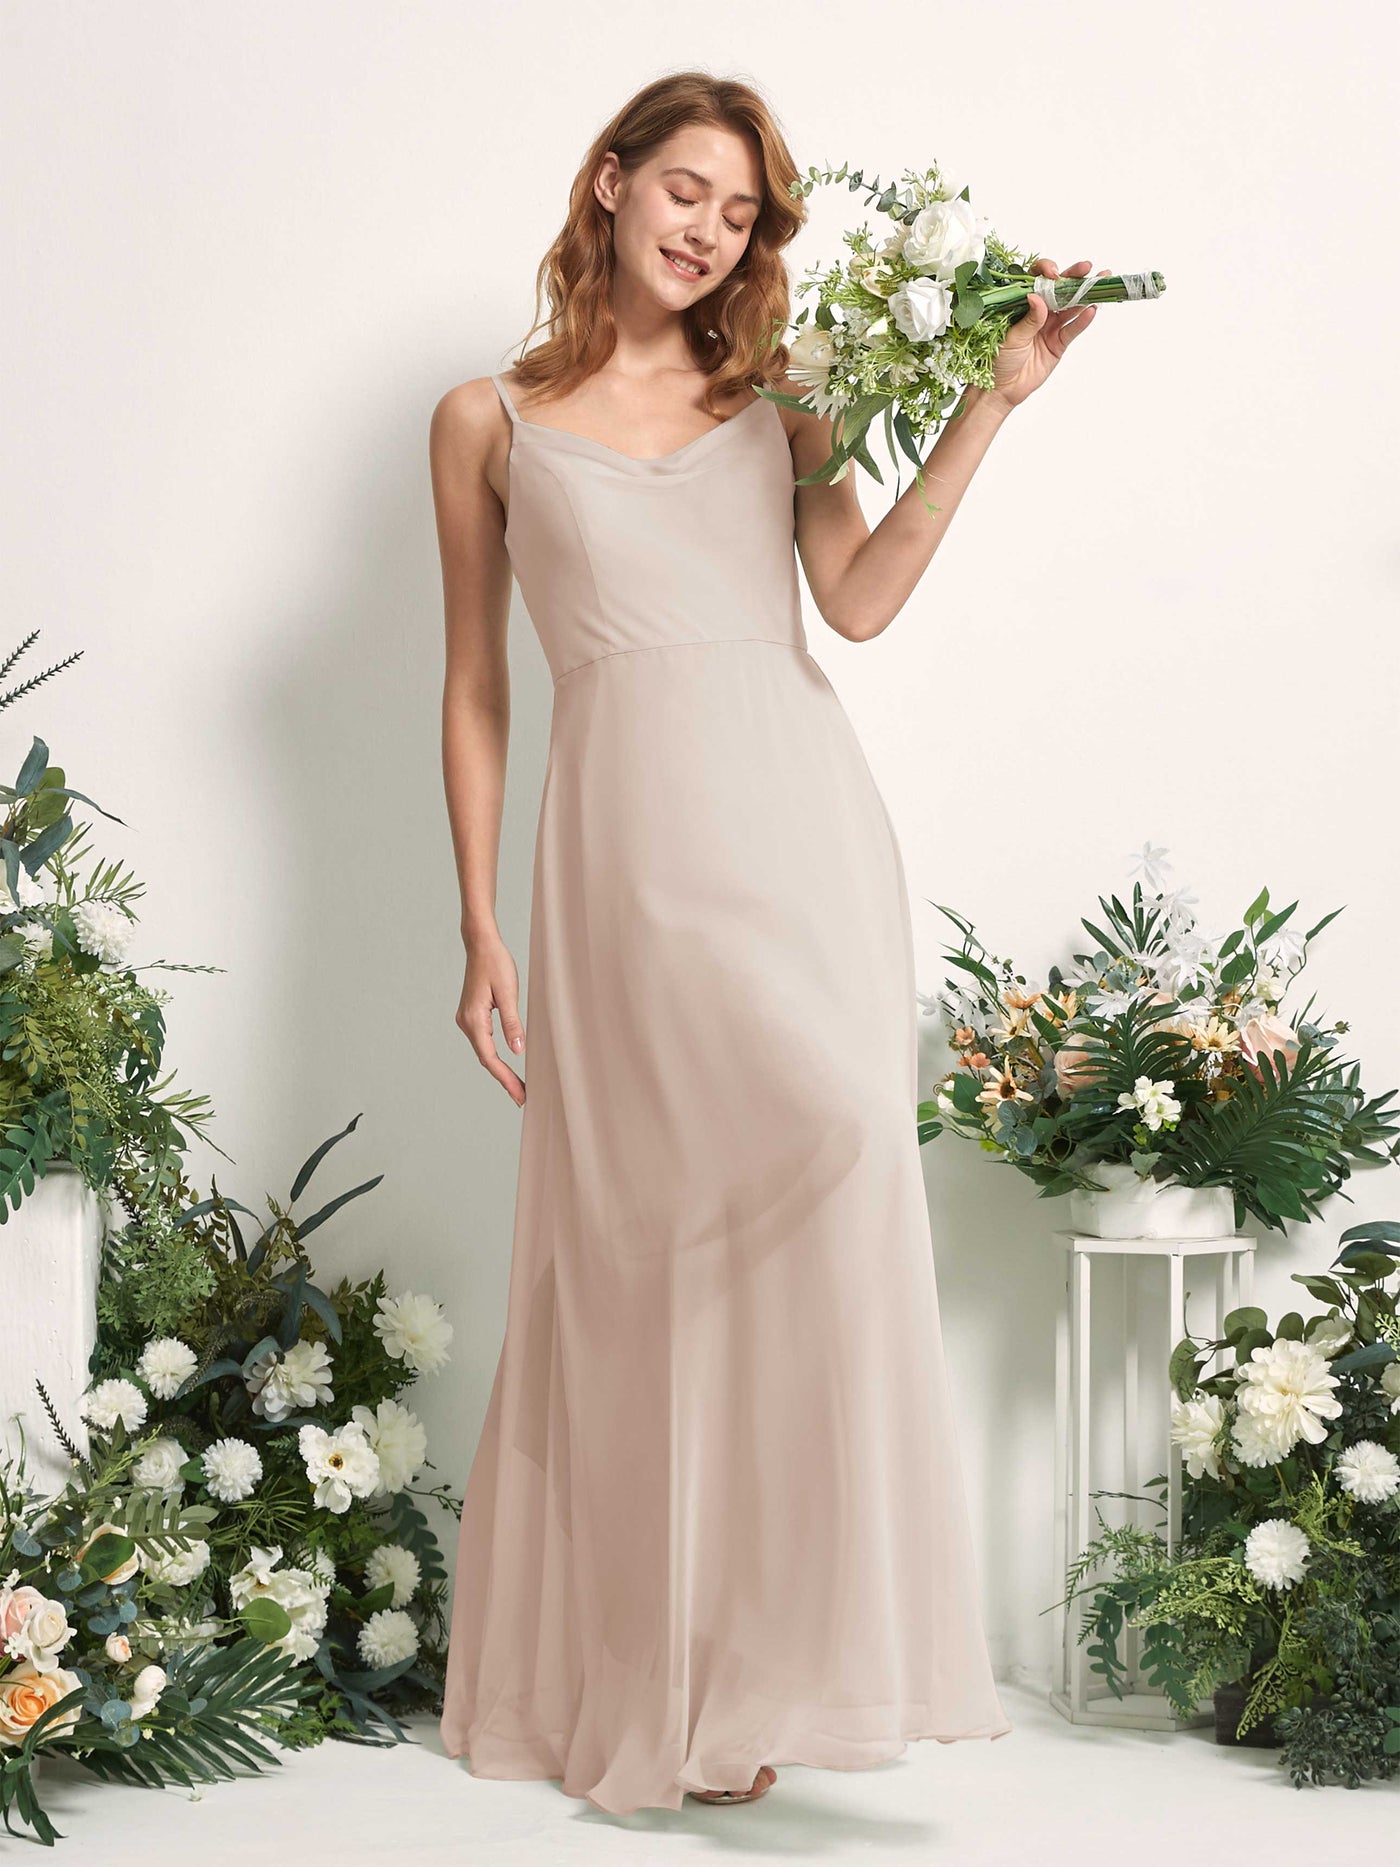 Bridesmaid Dress A-line Chiffon Spaghetti-straps Full Length Sleeveless Wedding Party Dress - Champagne (81227216)#color_champagne